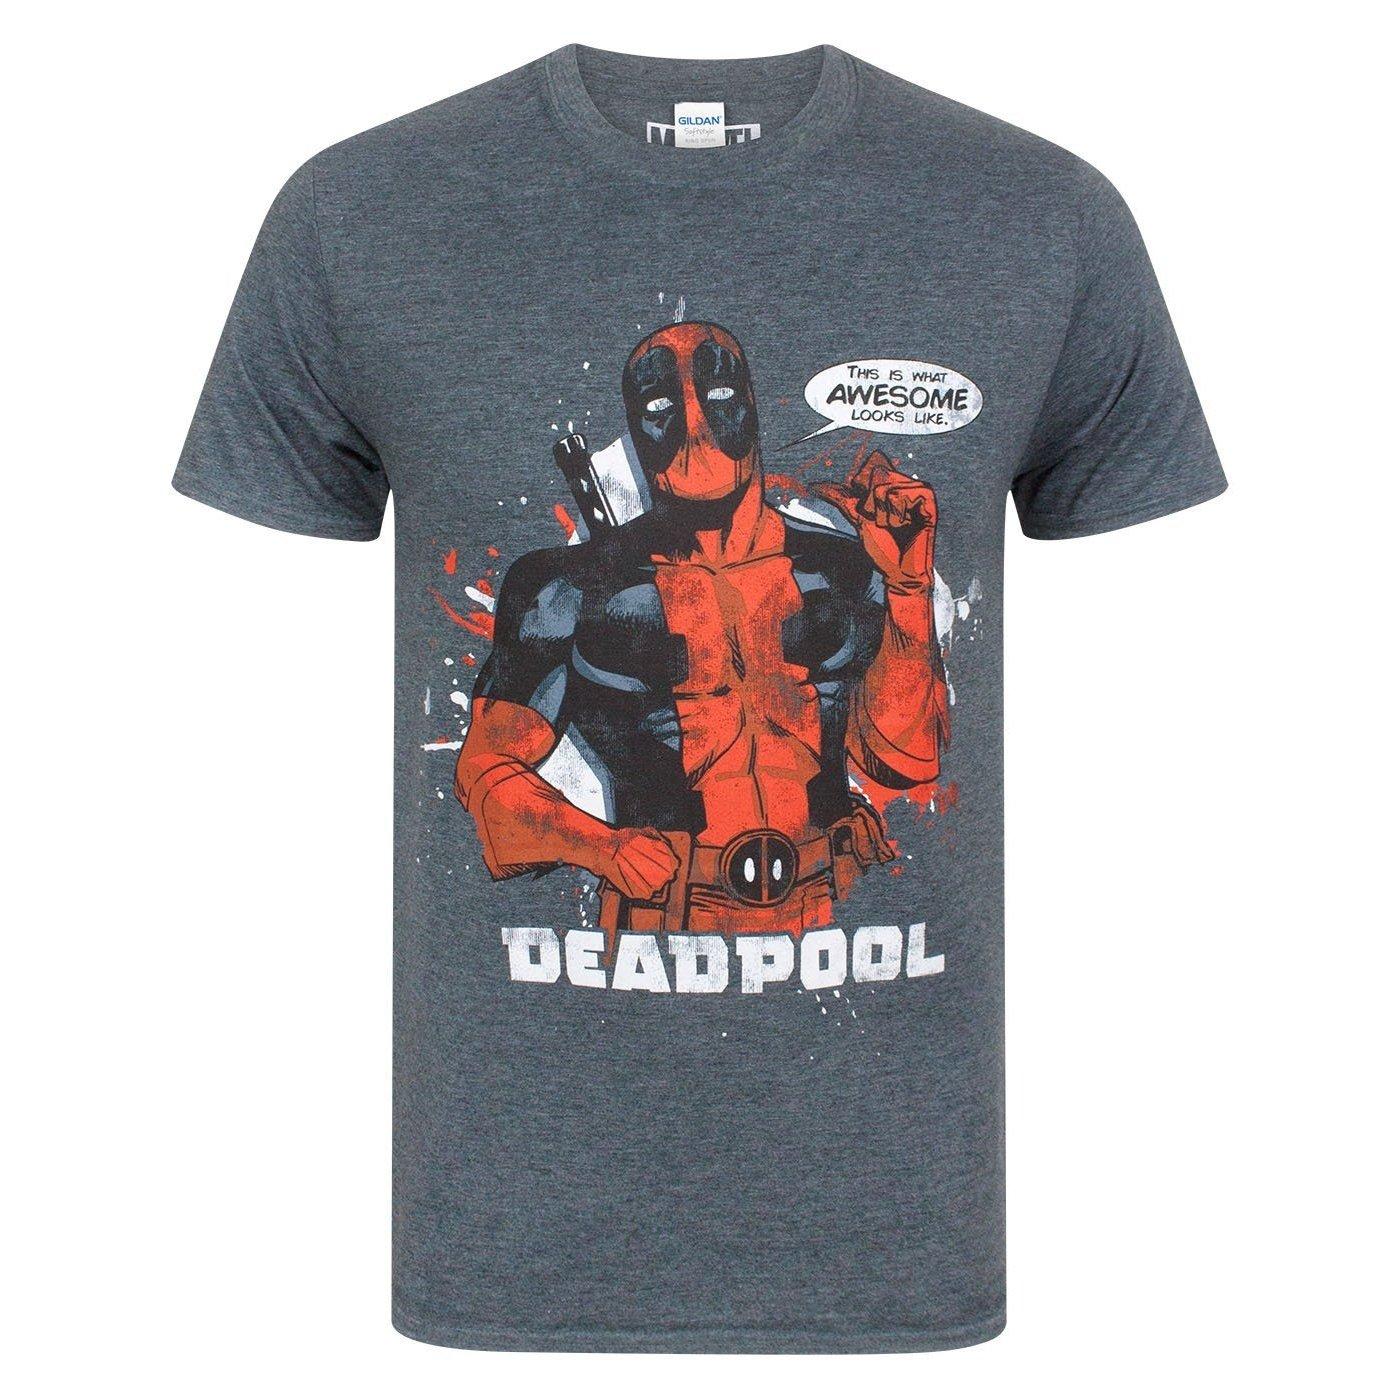 This Is What Awesome Looks Like Tshirt Herren Charcoal Black M von Deadpool